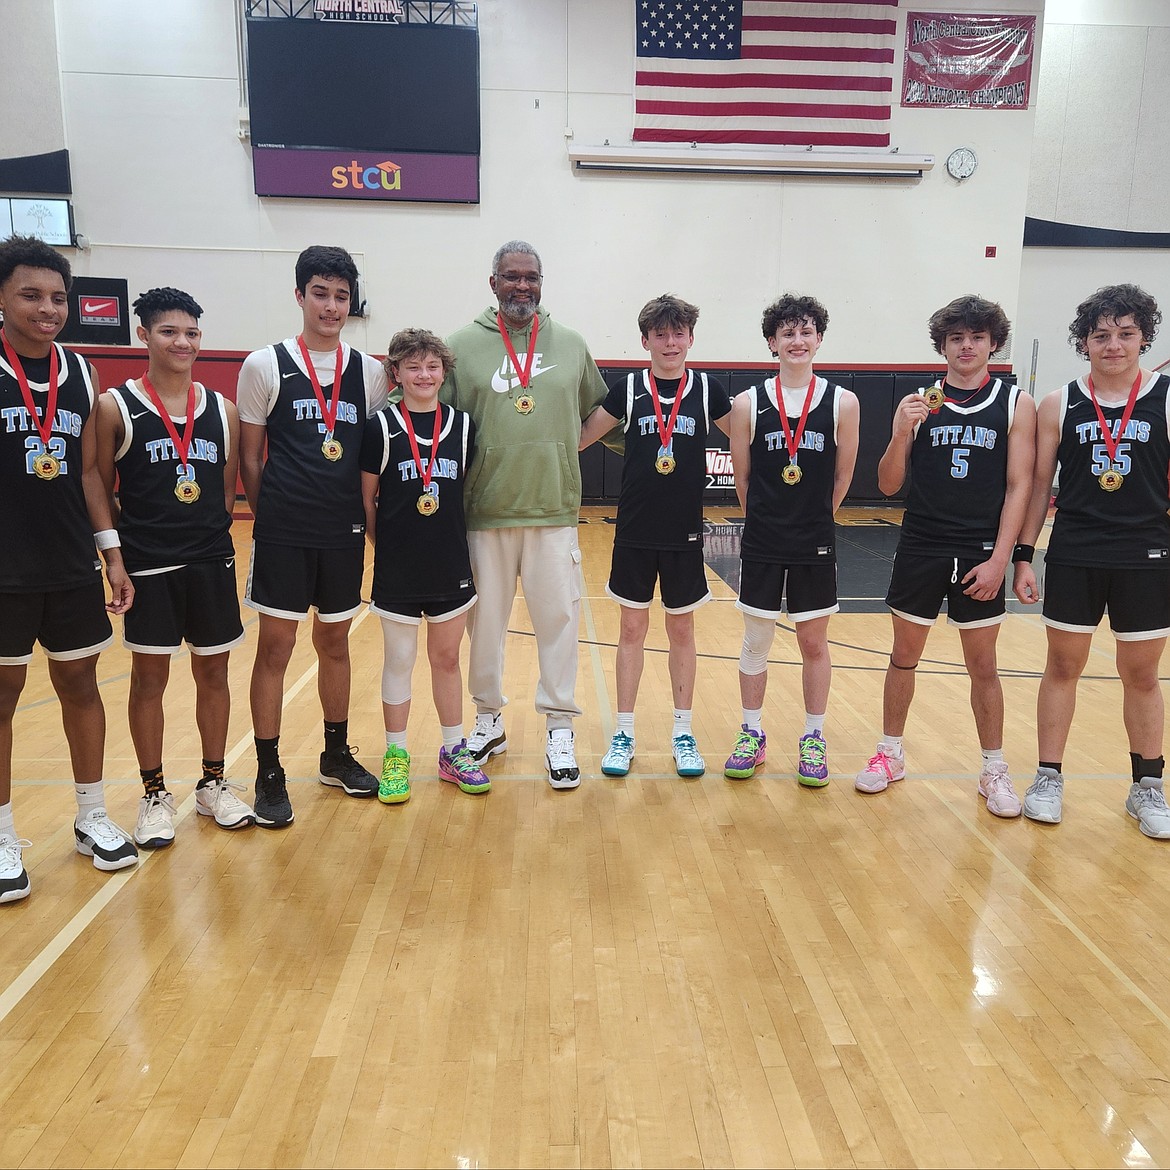 Courtesy photo
The 15U Titans AAU boys basketball team defeated the Sandpoint Futures 58-54 in the Swish Showcase championship played on Sunday in Spokane. From left are Miles Spencer, JaKolbe Lopp, Arjun Kandola, Sawyer Norisada (Post Falls), coach Leon Sayers, Evan Drew, Wallace Frates, Makya Quincy (Post Falls) and Rex Arroyo.